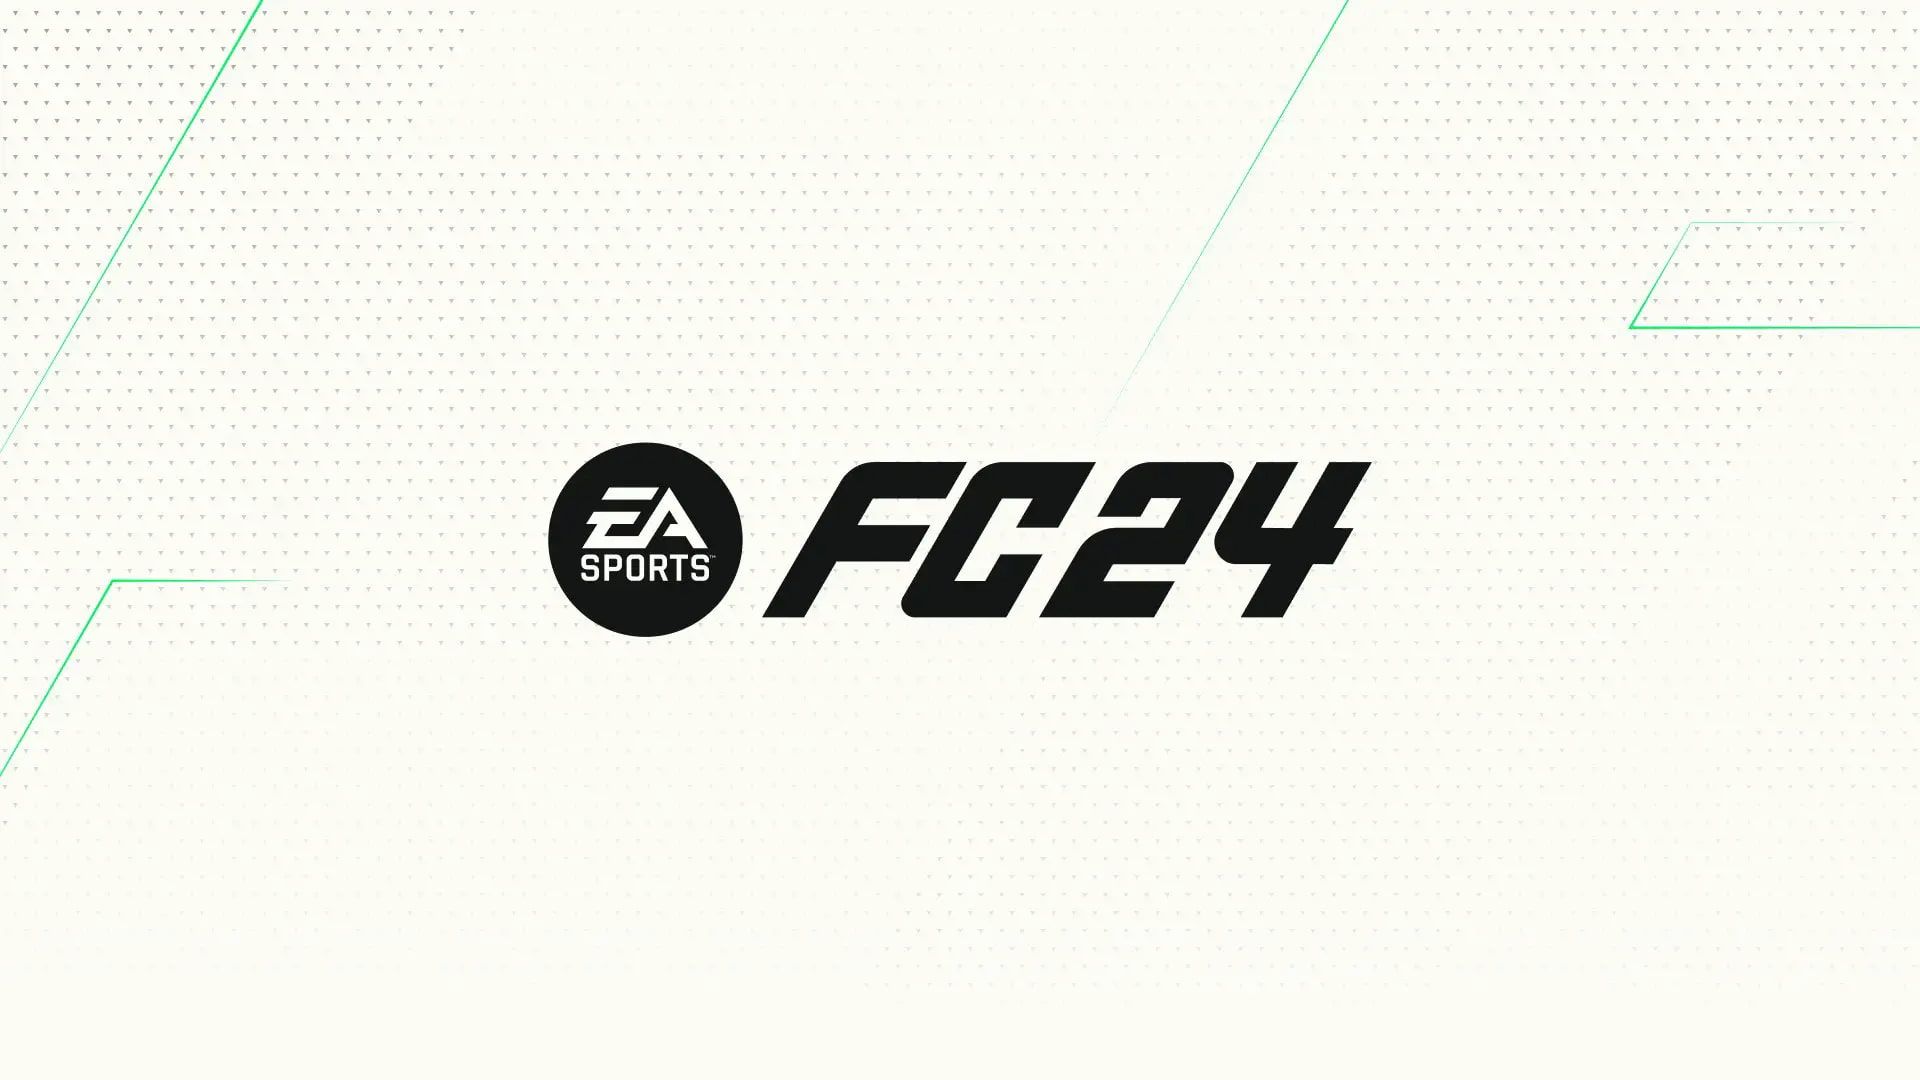 FIFA 24: How to form and manage your own team in the career mode of EA FC 24?  : r/FIFANEWS